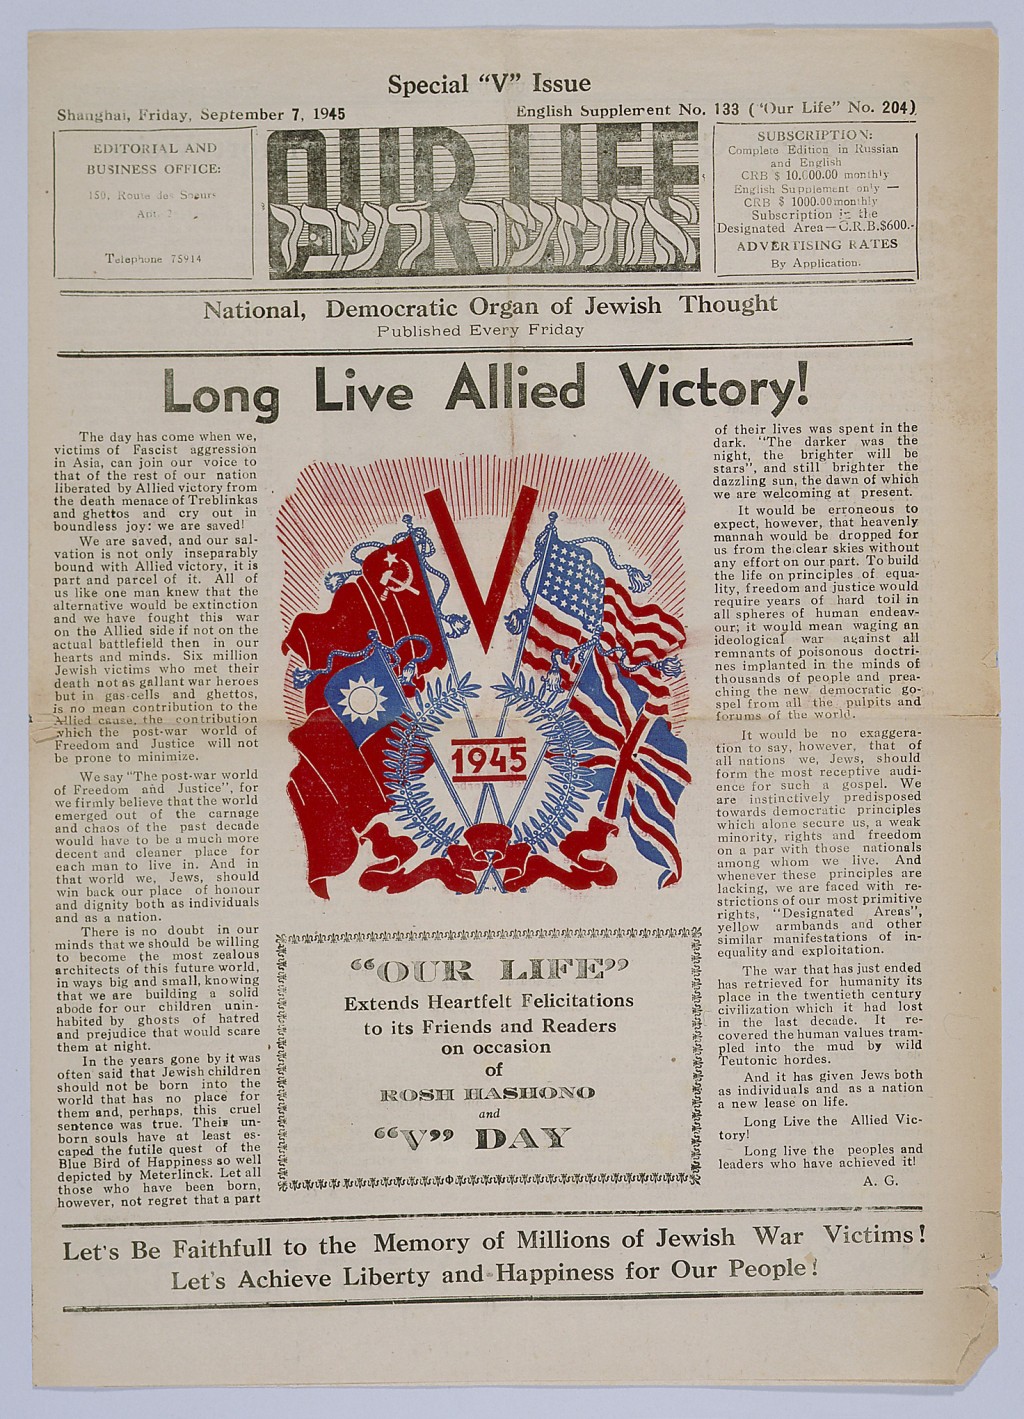 Our Life newspaper: Allied victory [LCID: 2002pkcn]